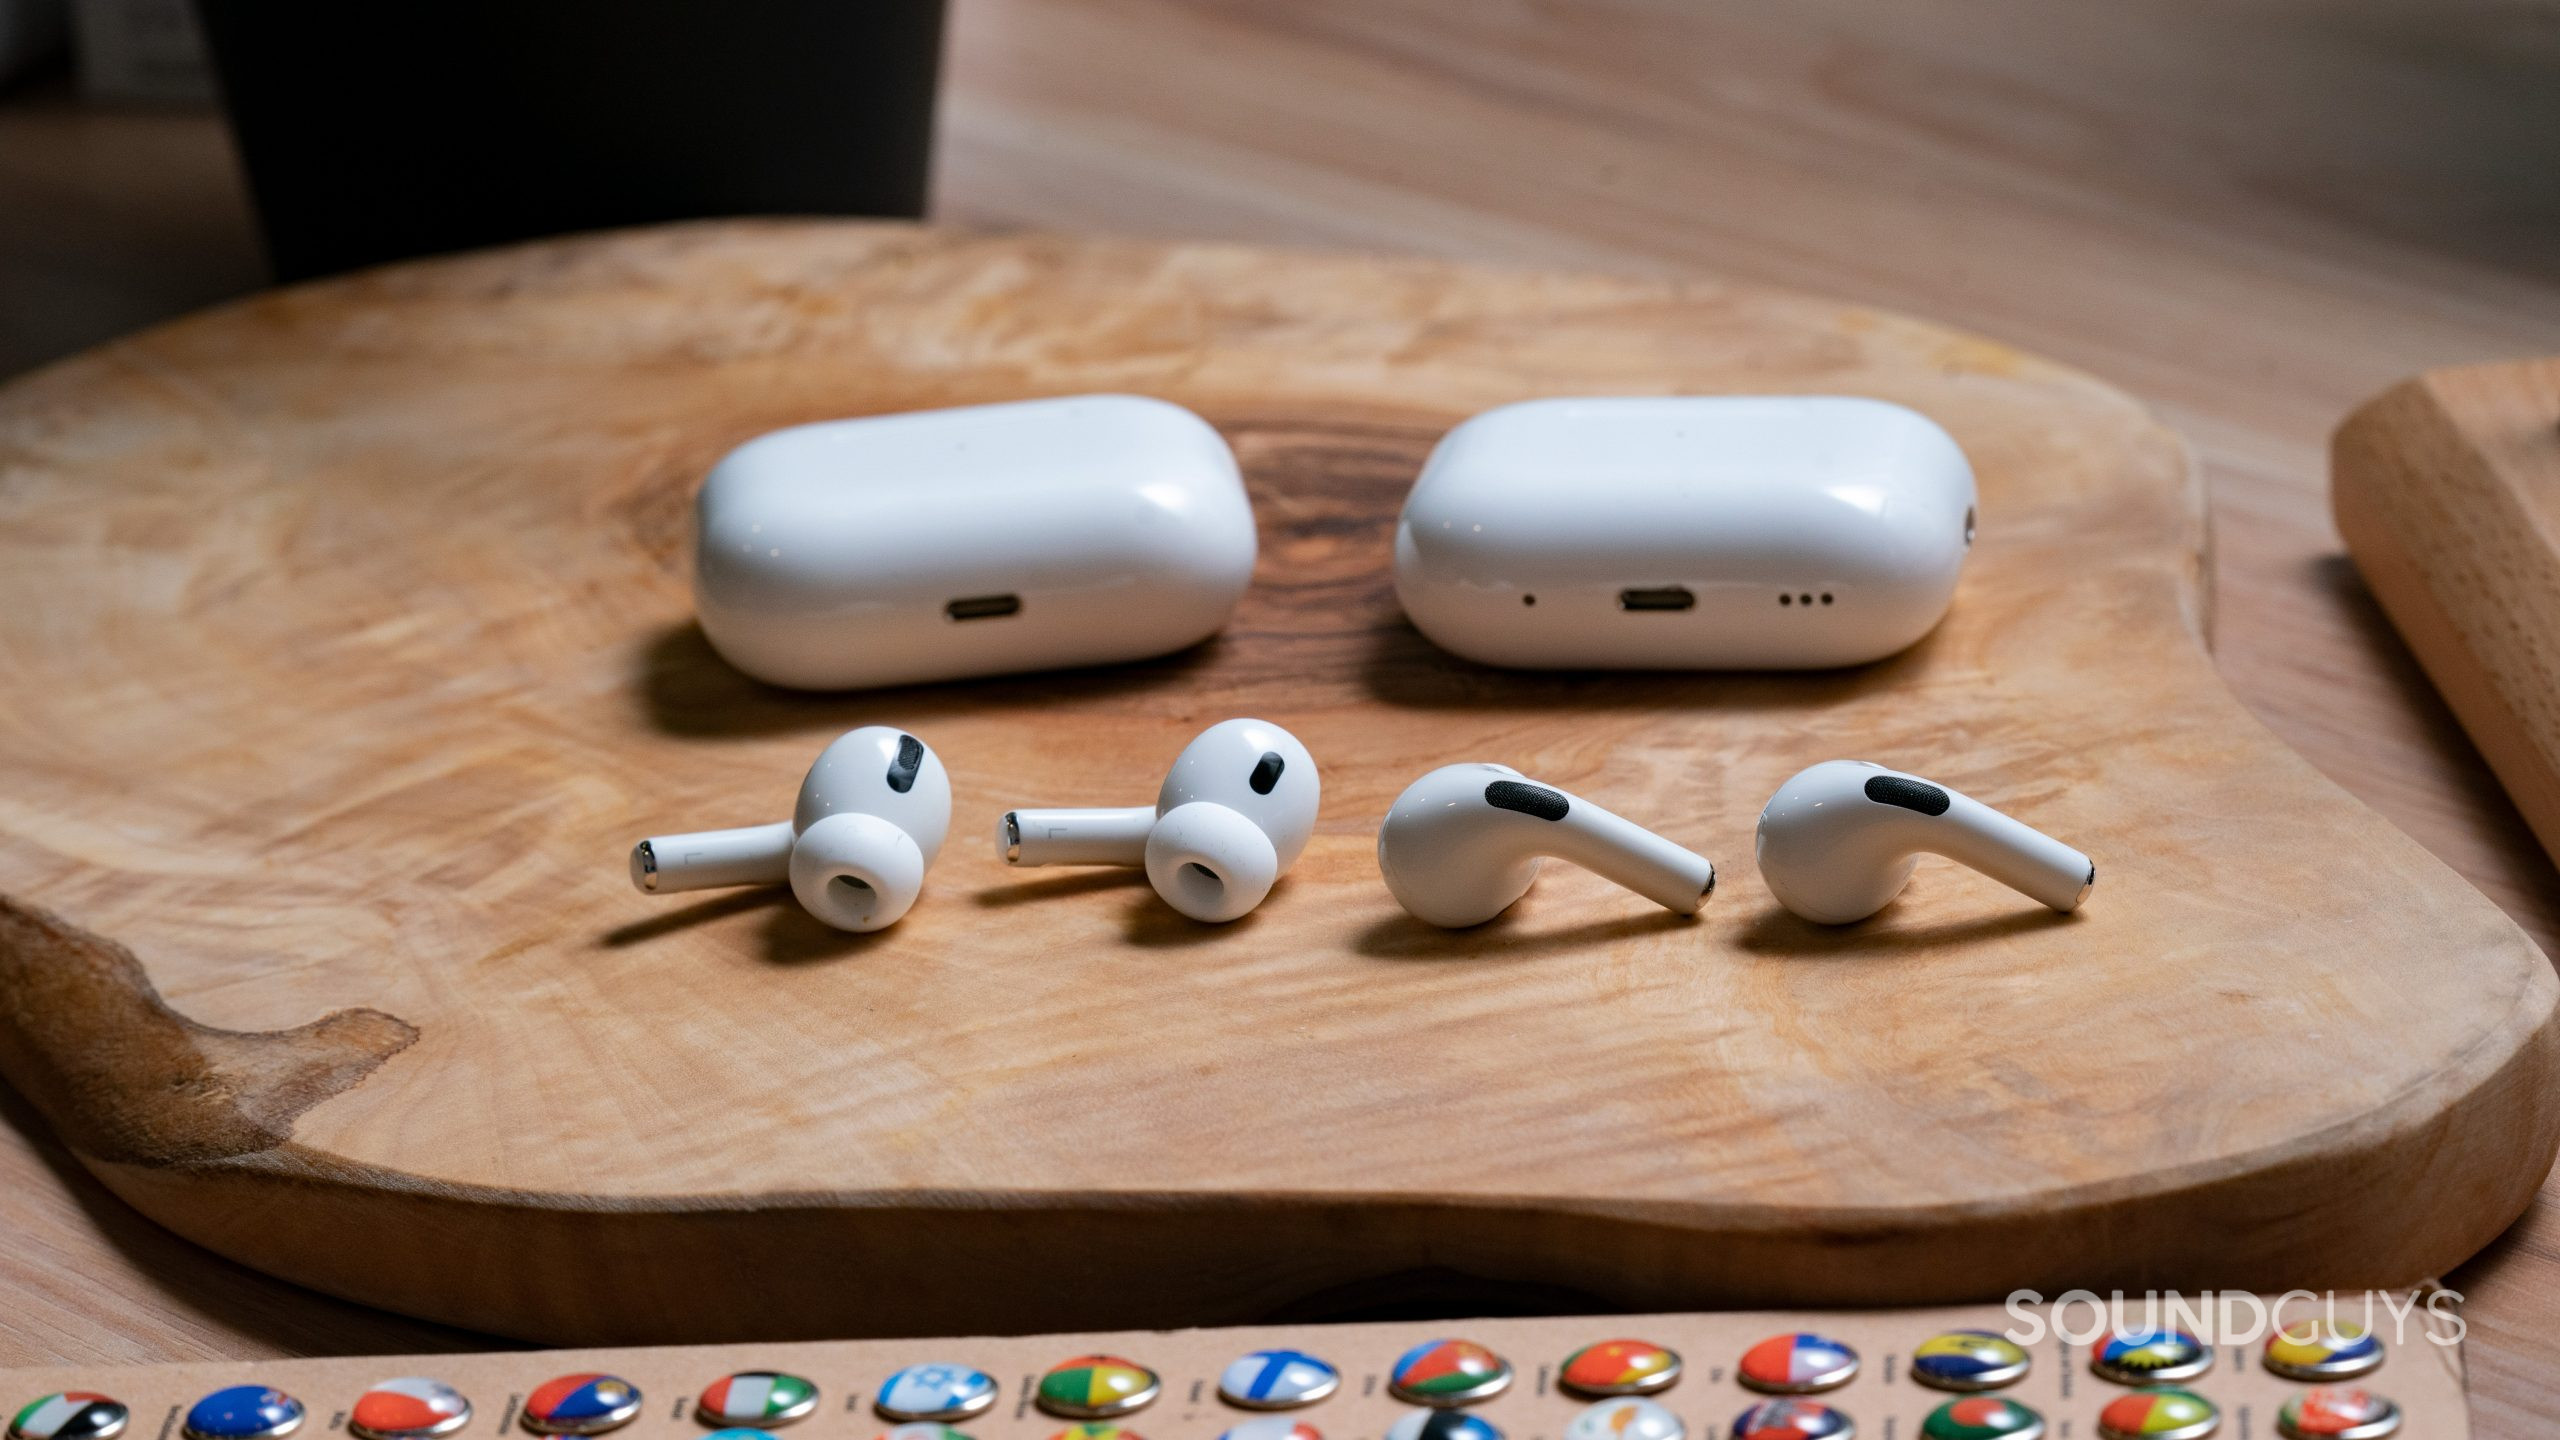 The Apple AirPods Pro (2nd generation) lays on a wooden surface next to the Apple AirPods Pro (1st generation), earbuds out of case.